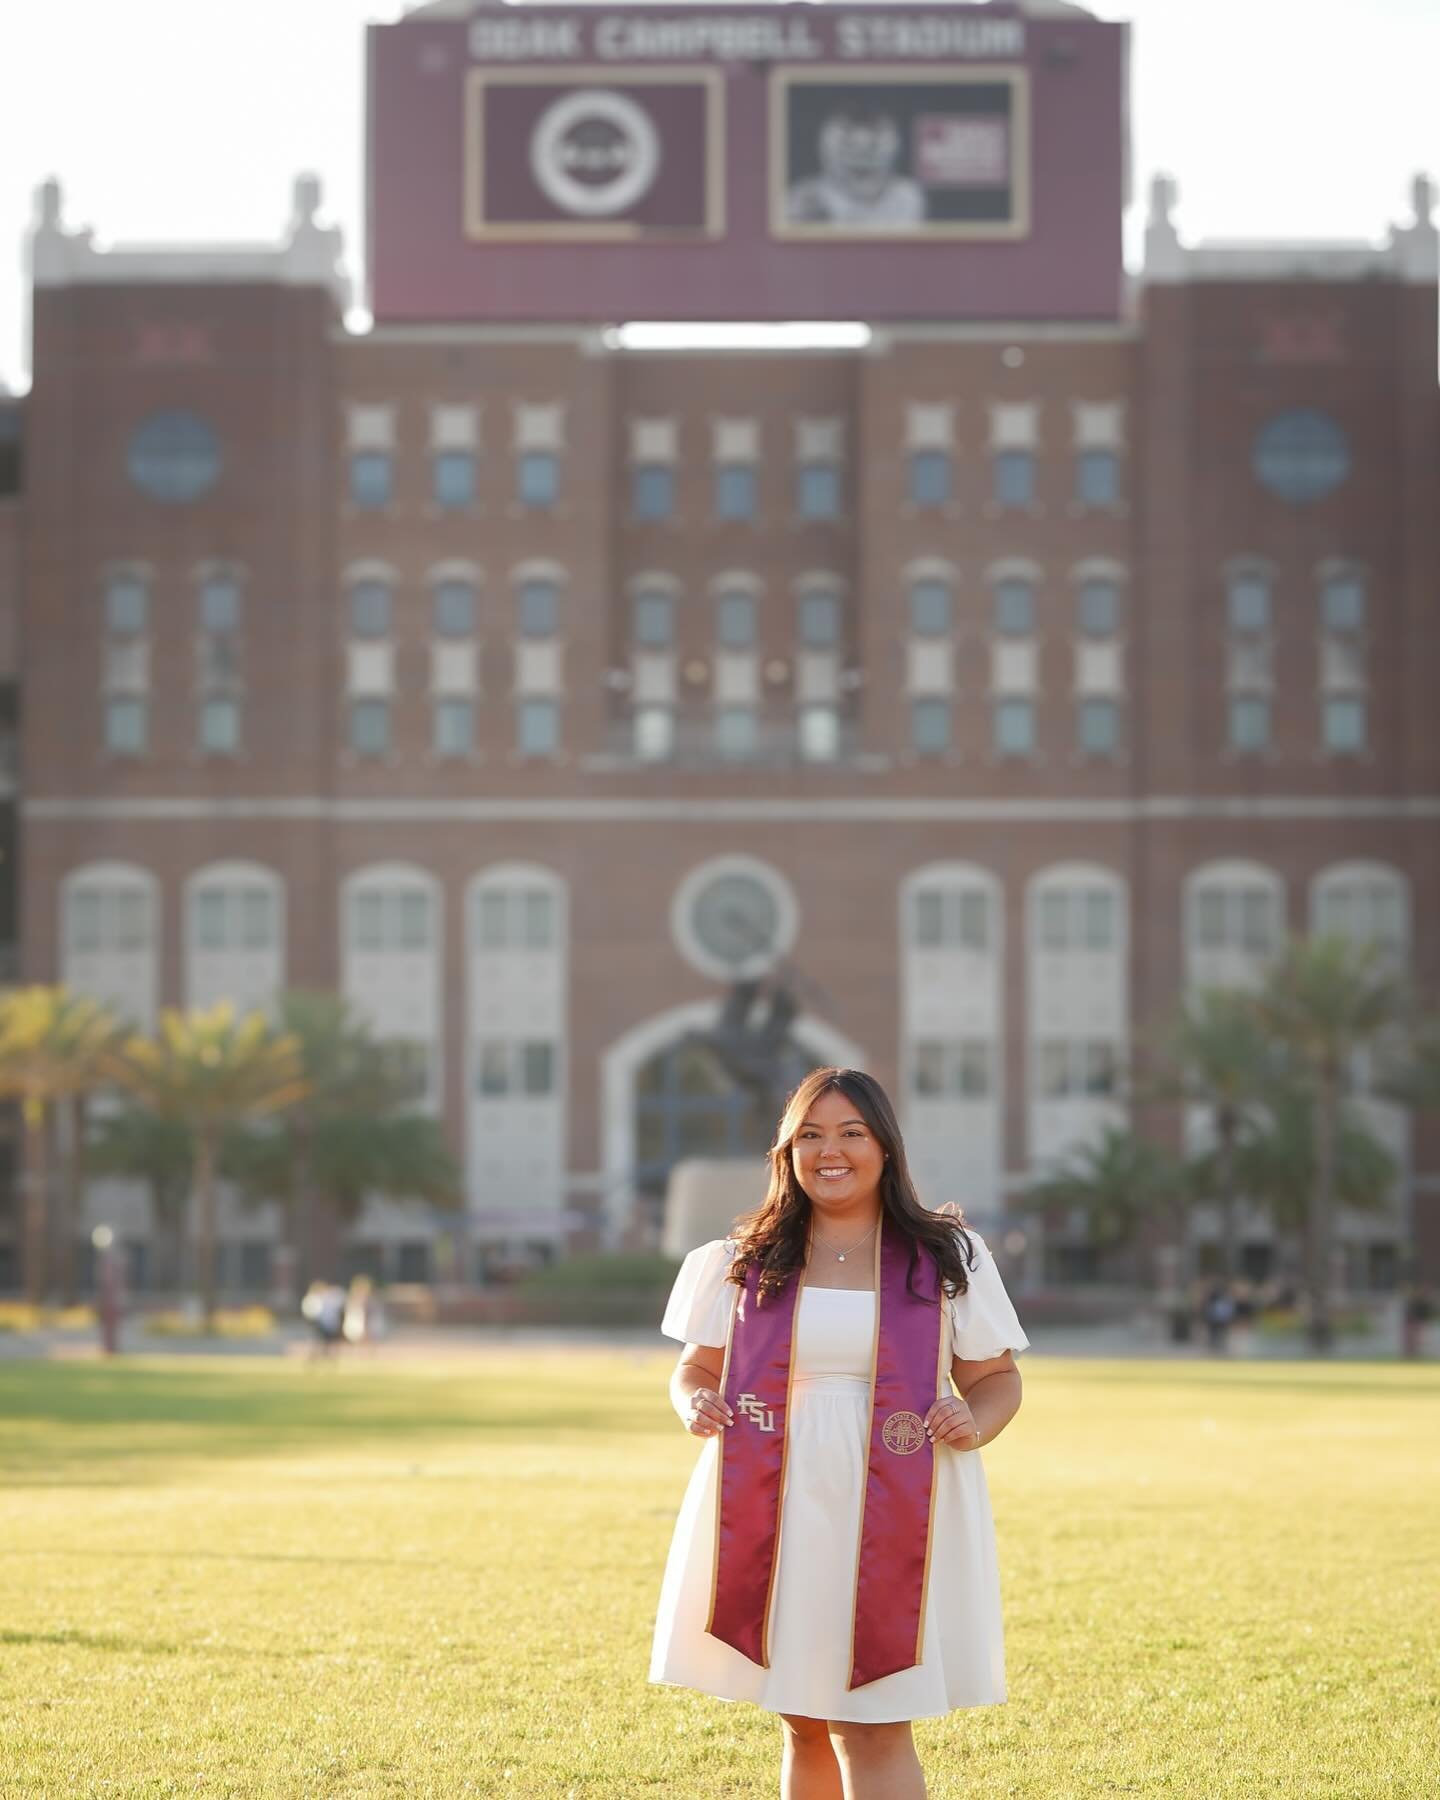 Made my way back to Tallahassee this weekend to capture some special moments for this stunning grad! Congratulations class of 2024!🎓 

#fsu #fsugraduation #classof2024 #photography #graduationpictures #tallahassee #westpalmbeach #westpalmbeachphotog